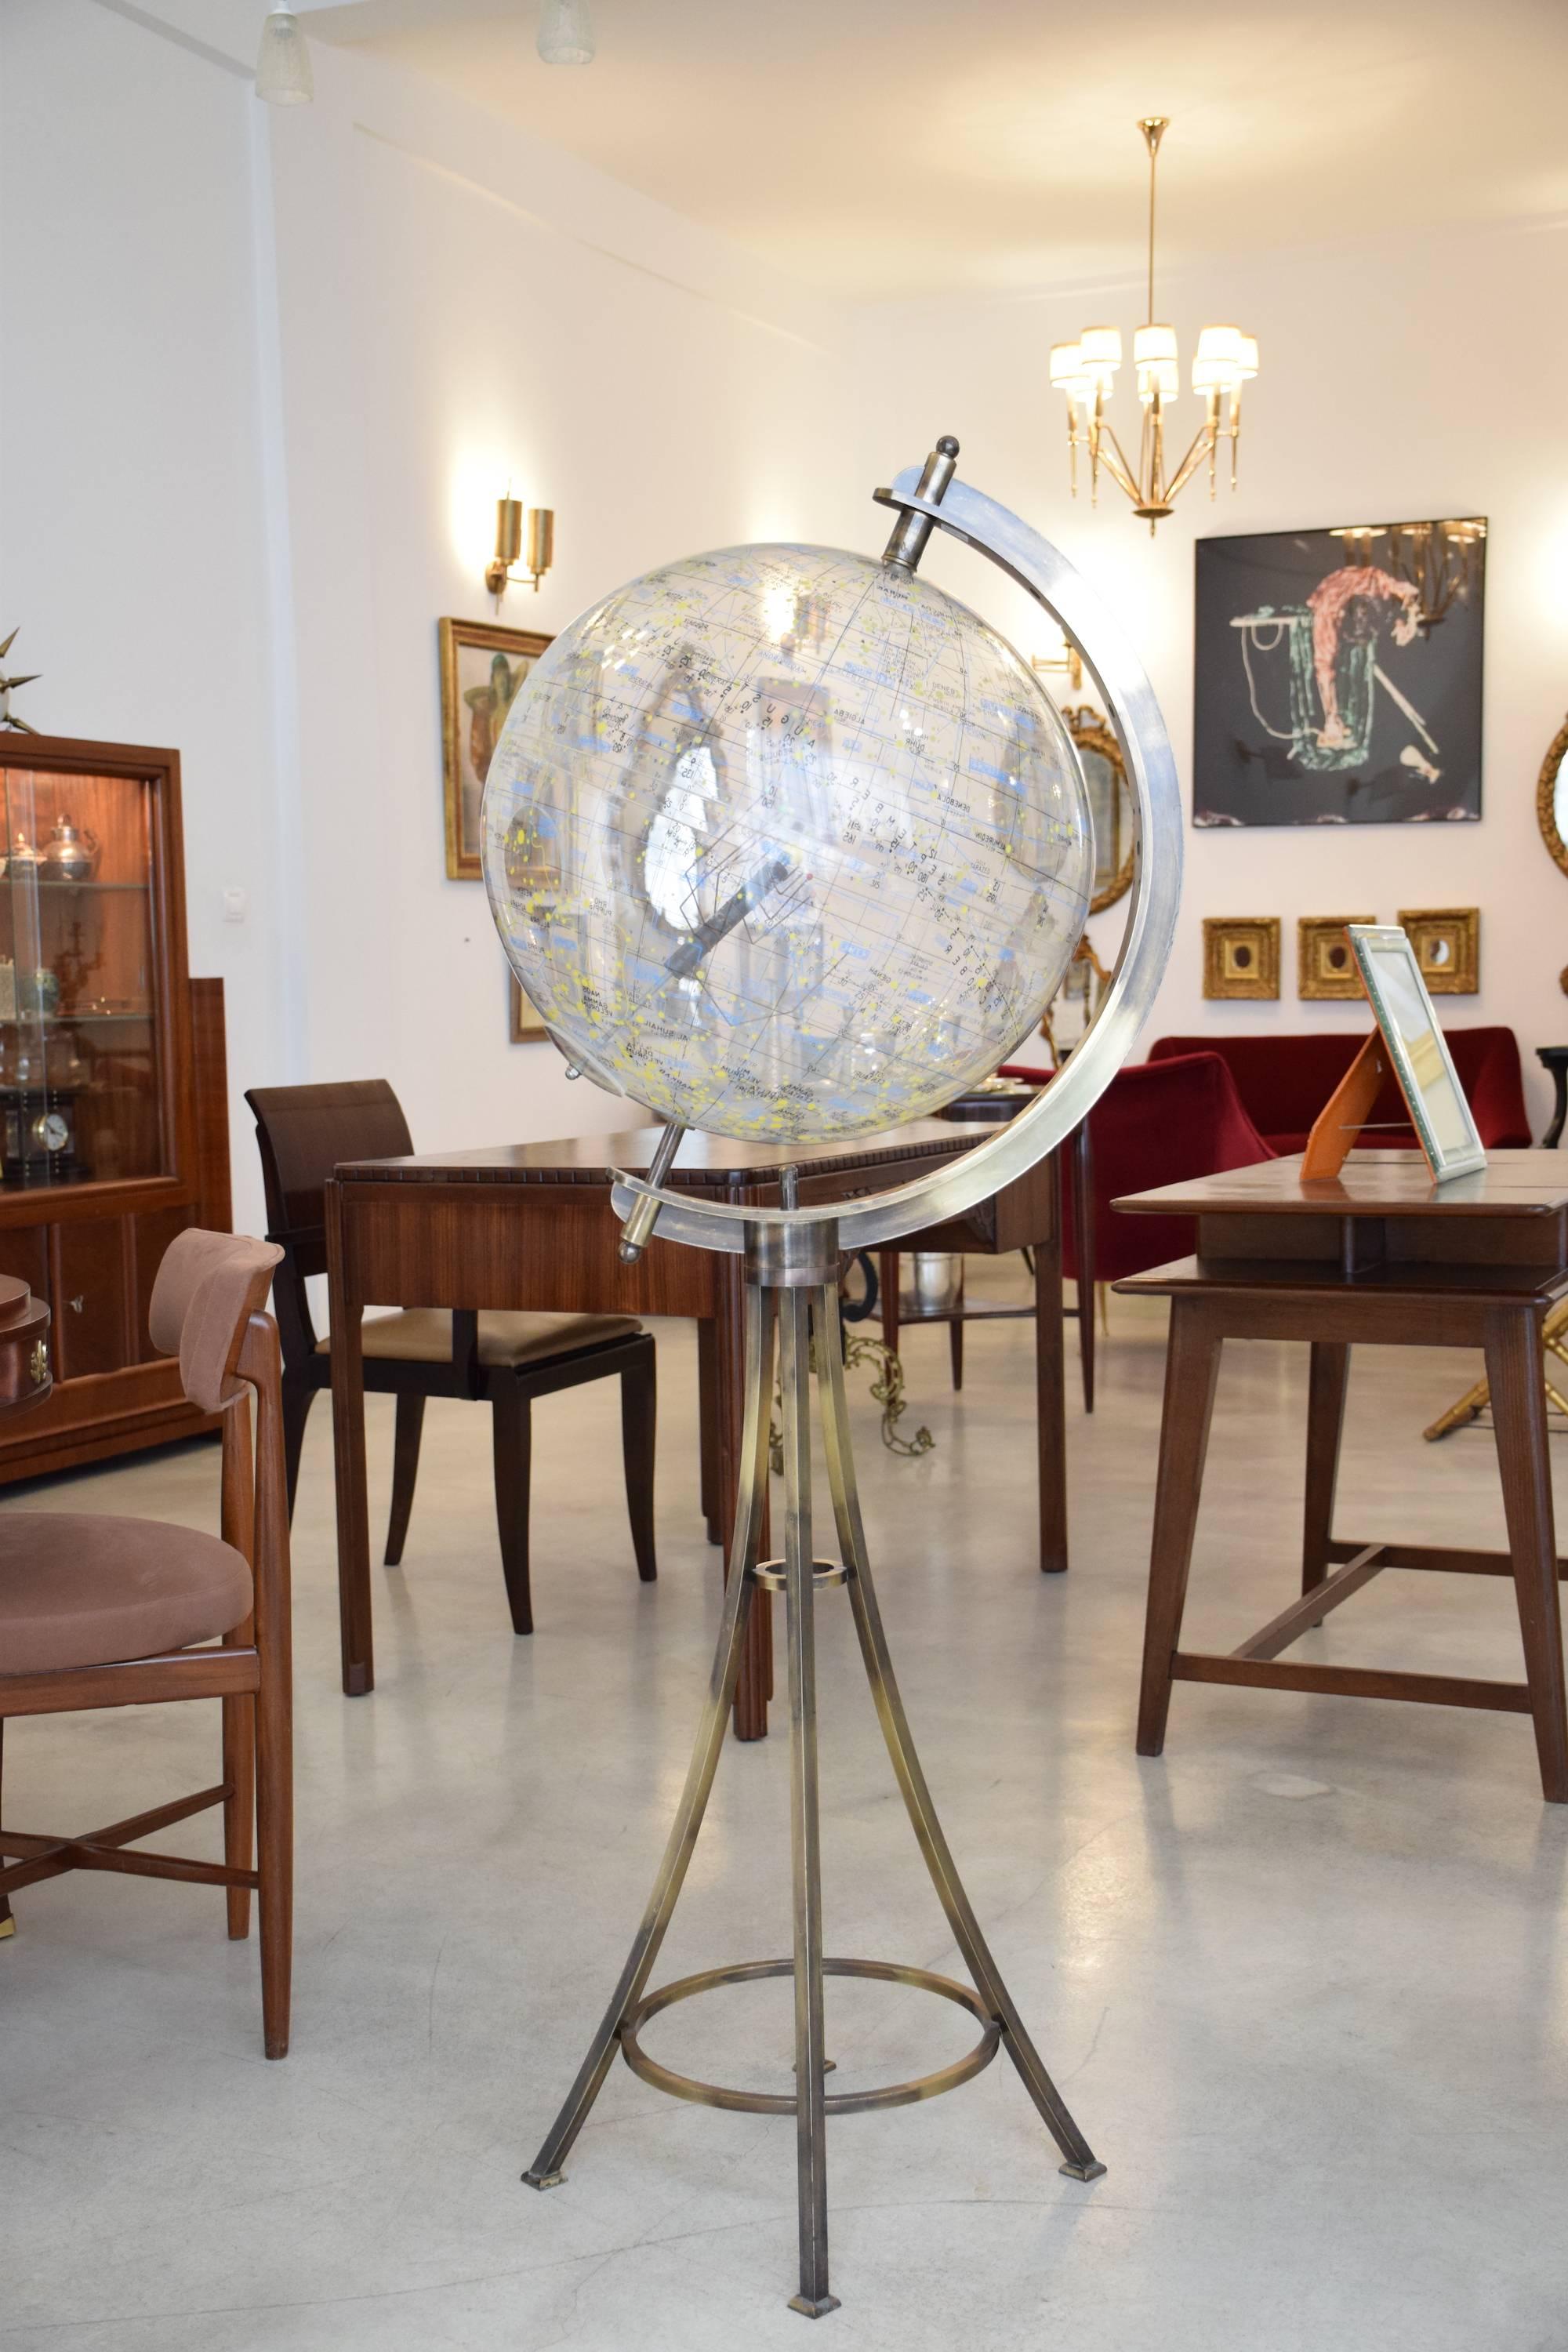 This grand celestial globe was designed by Robert Farquhar (1932-2015) in Philadelphia in the late 1970s - a renowned American expert in planetary exploration, spacecraft design and celestial navigation who worked for NASA for over two decades and